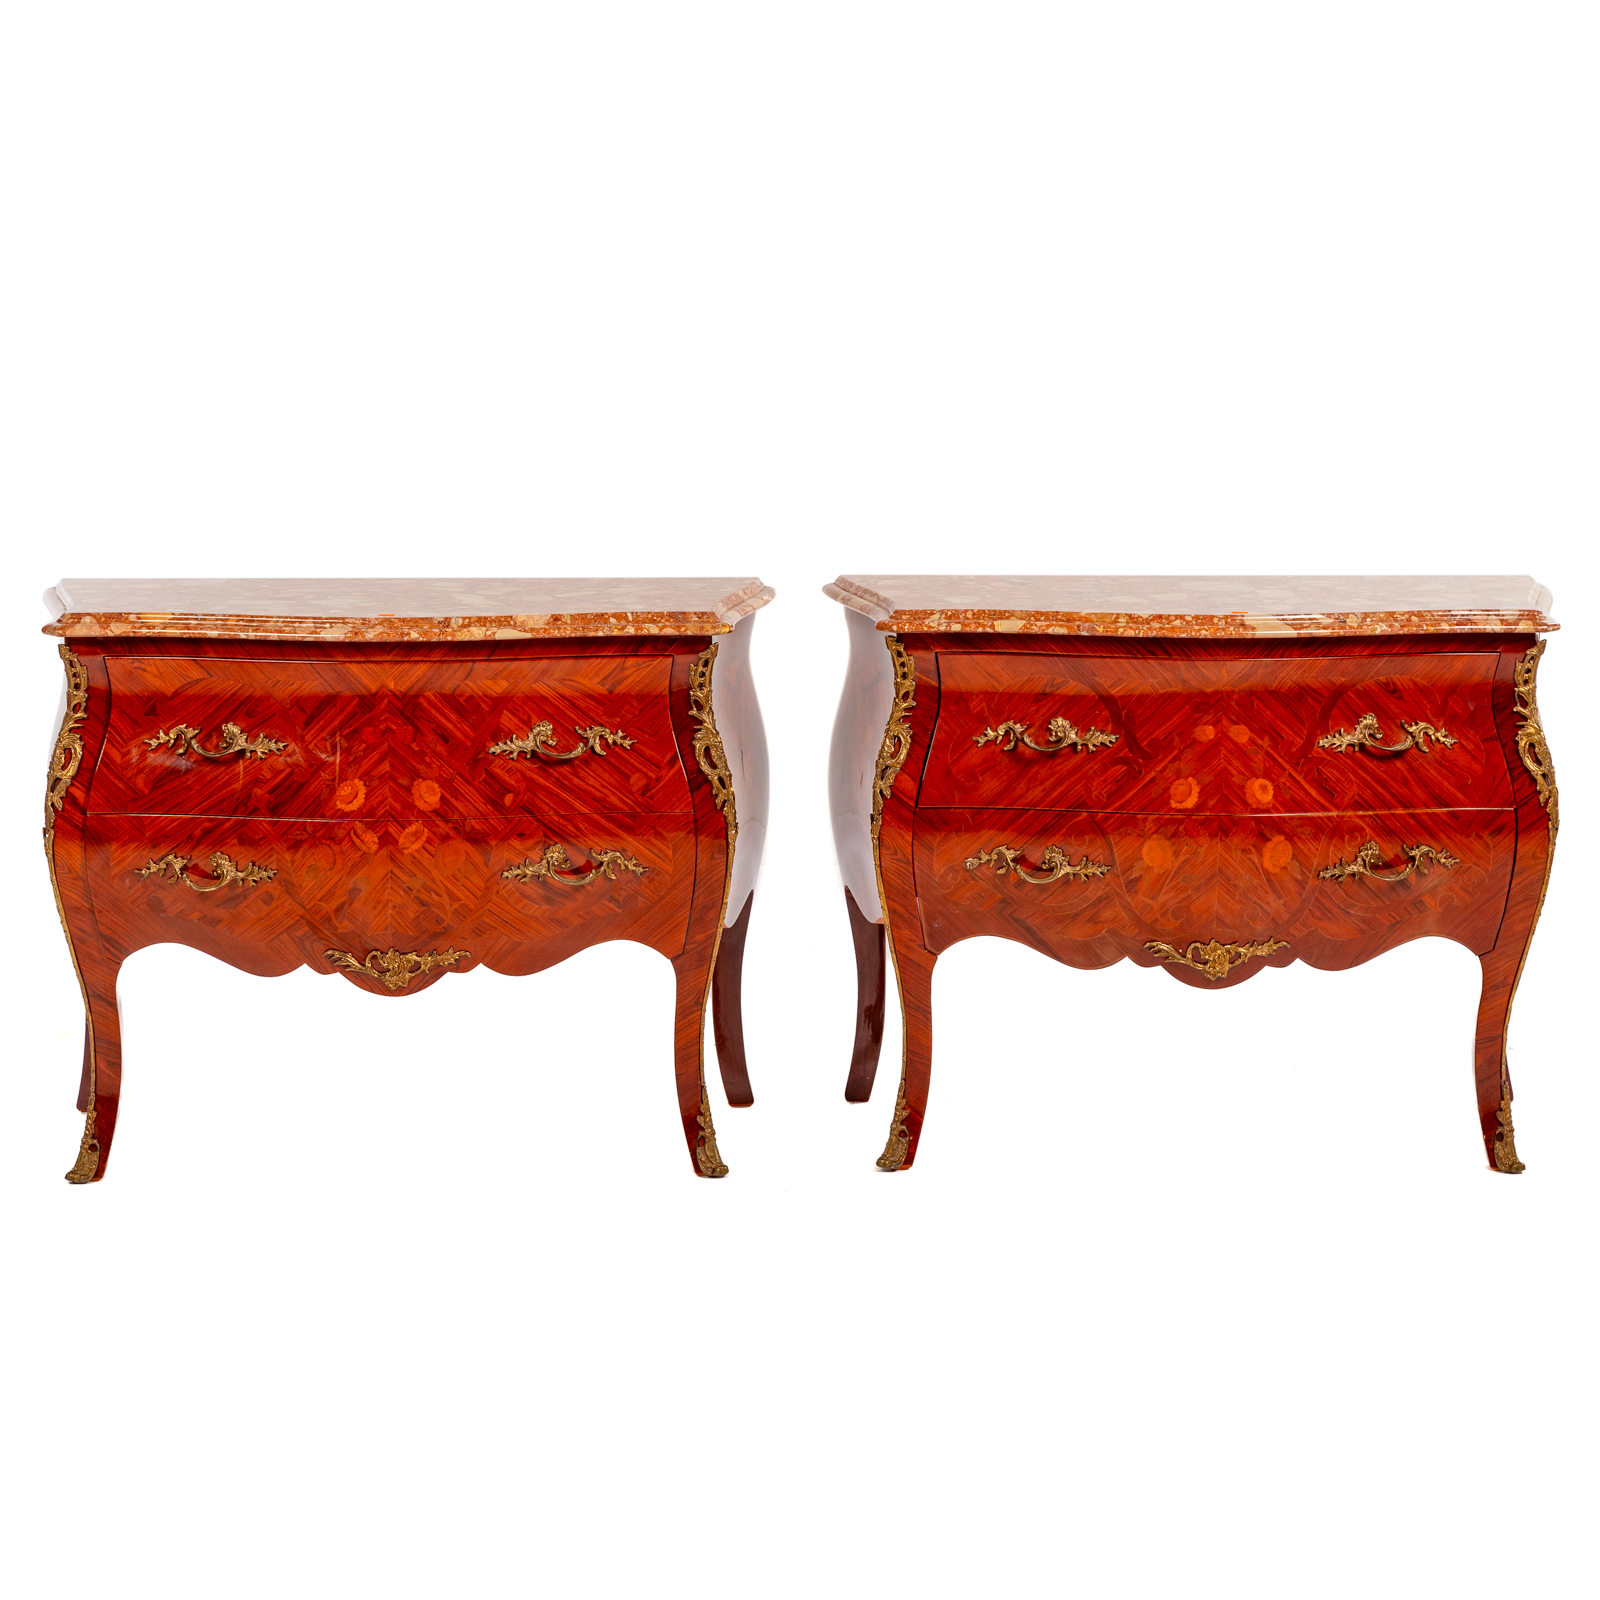 A PAIR OF LOUIS XV STYLE MARBLE